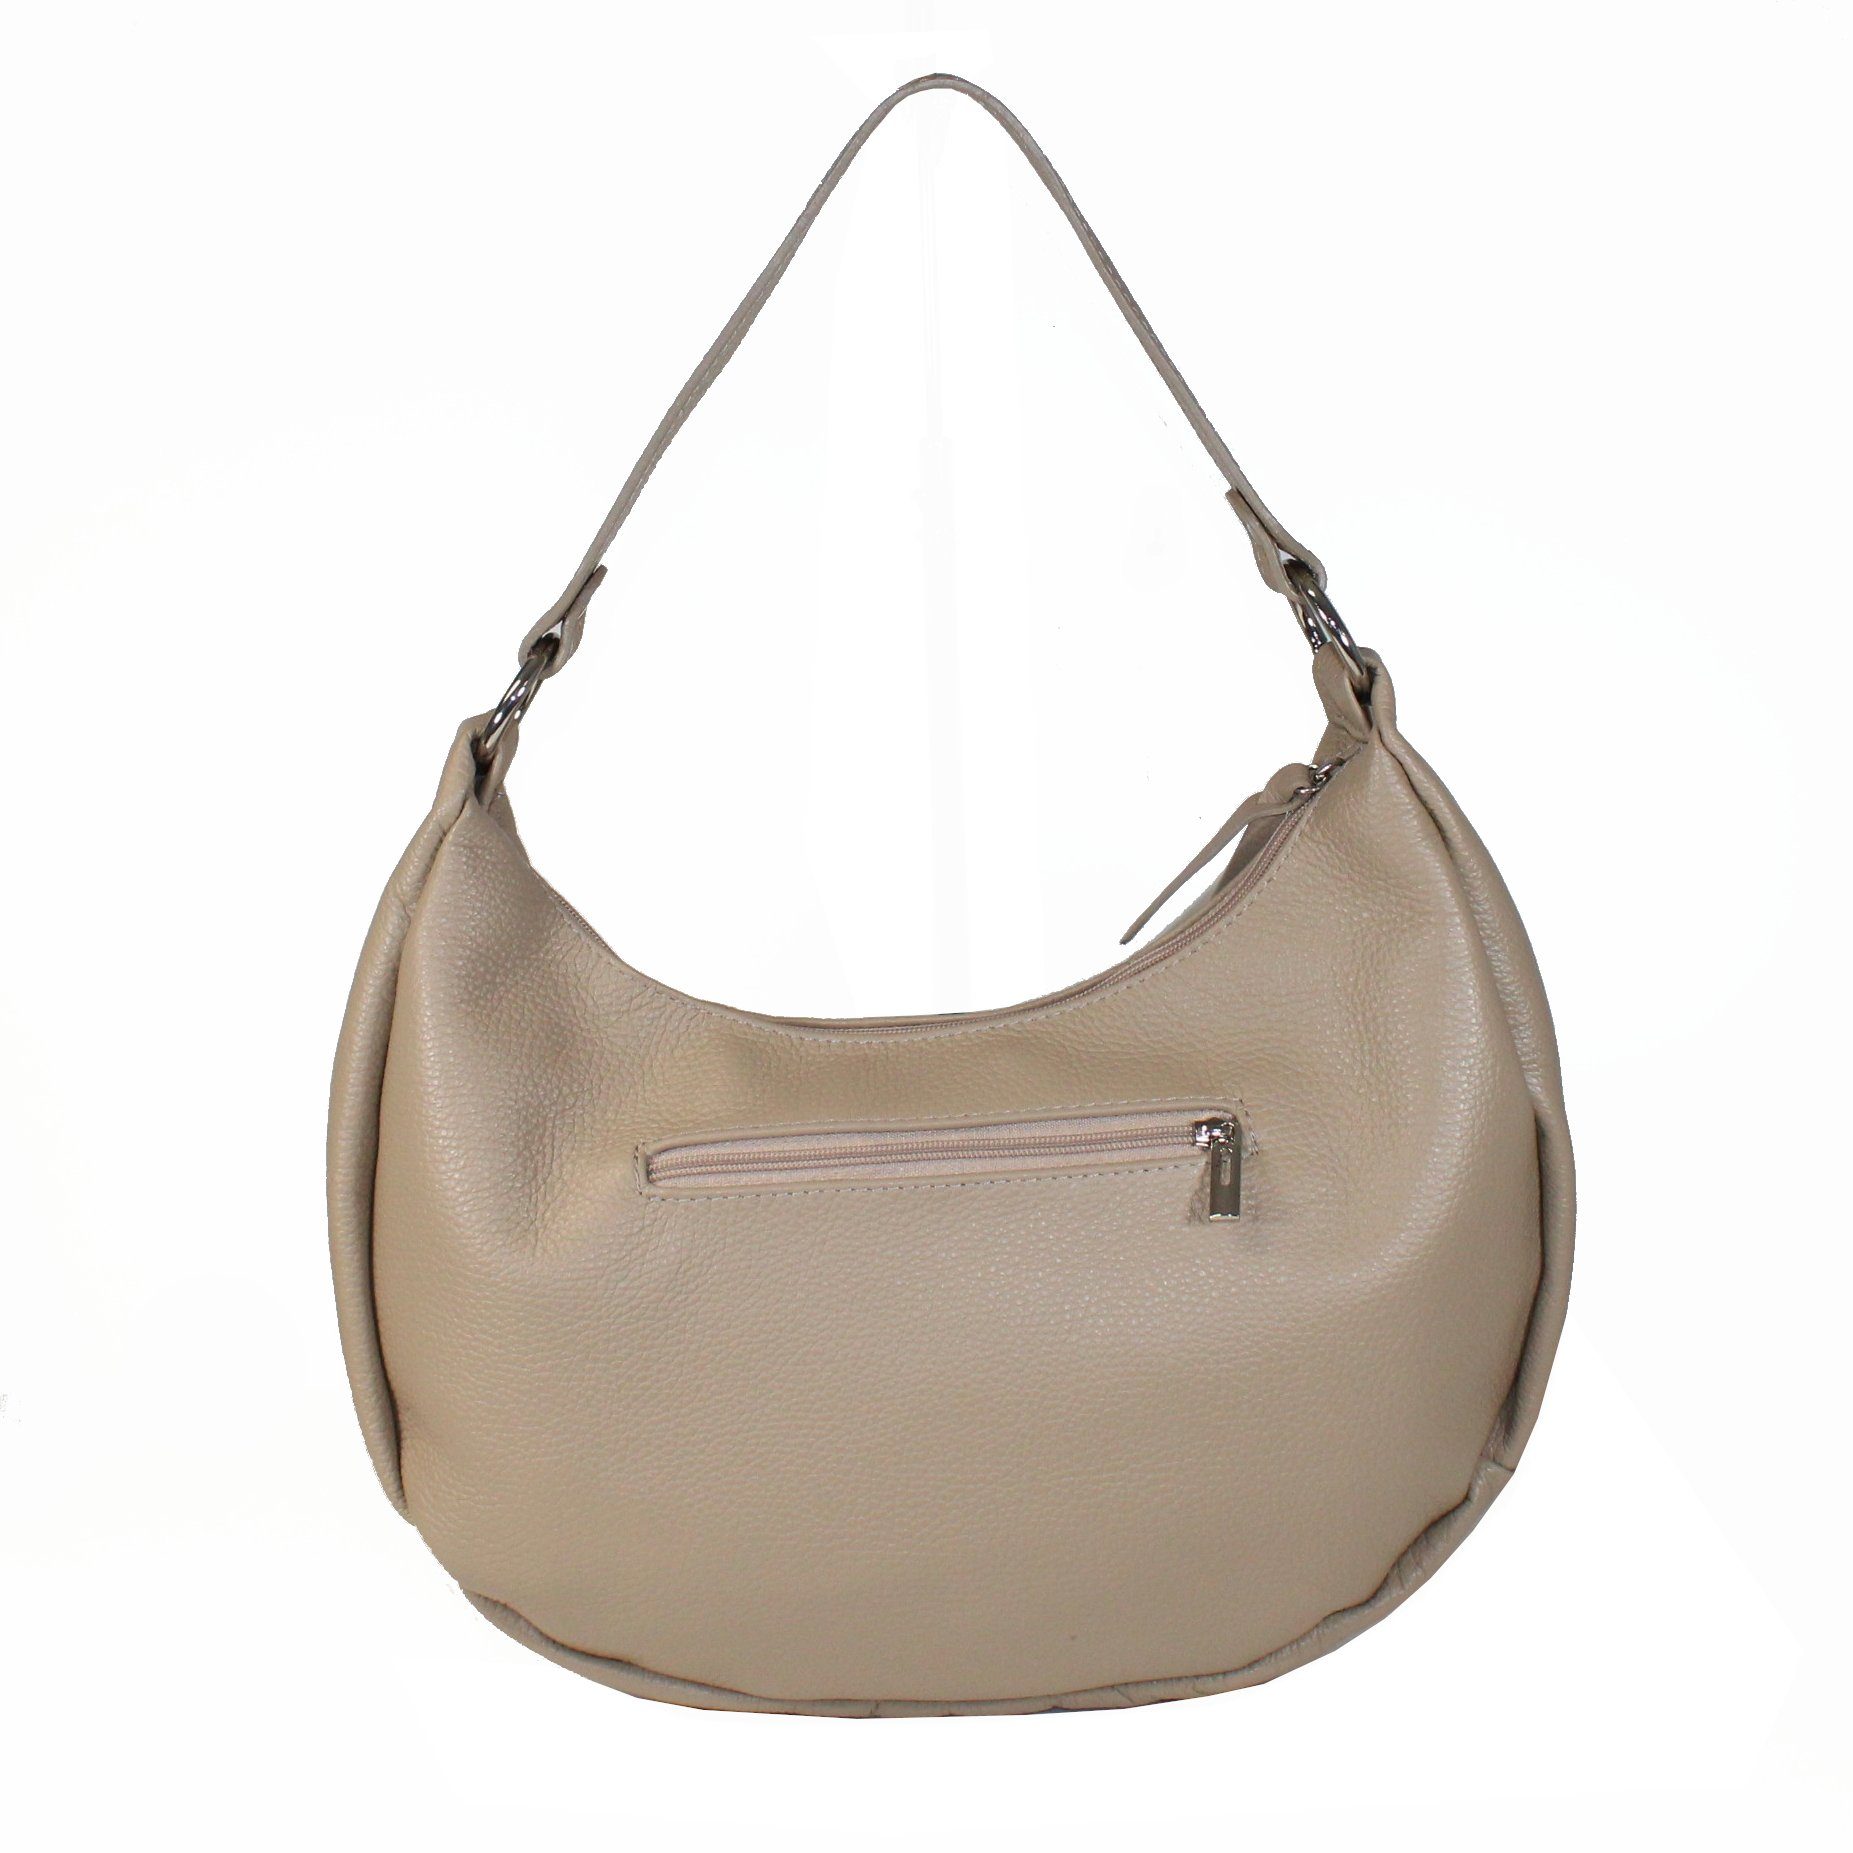 Taupe Made fs-bags in Patchwork Optik, fs7219, Italy Handtasche